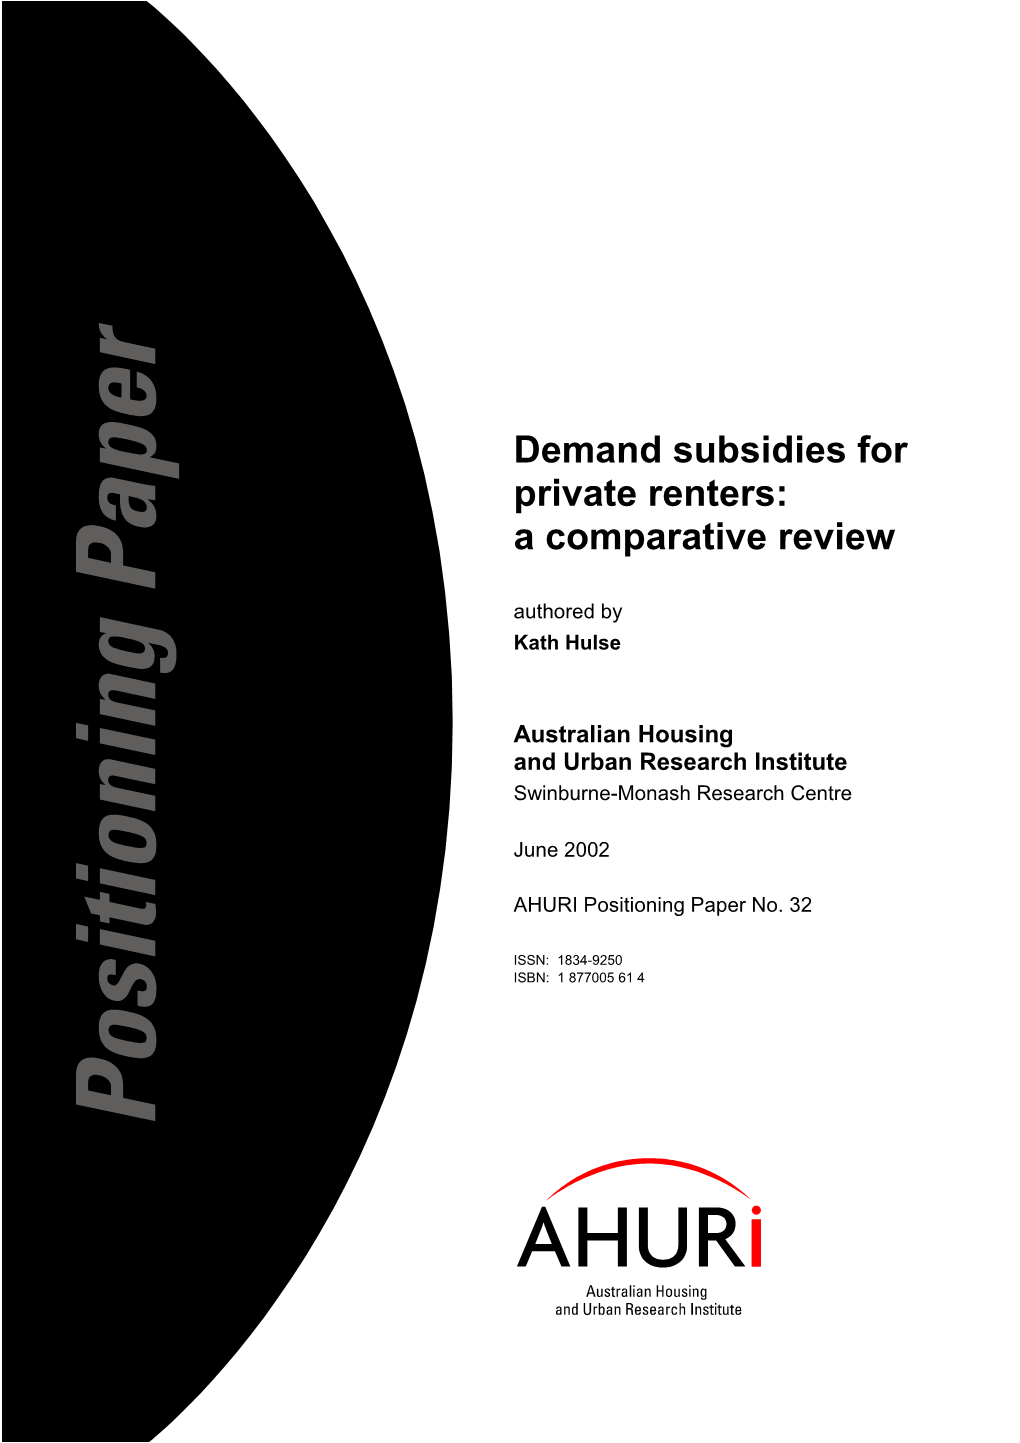 Demand Subsidies for Private Renters: a Comparative Review Authored by Kath Hulse